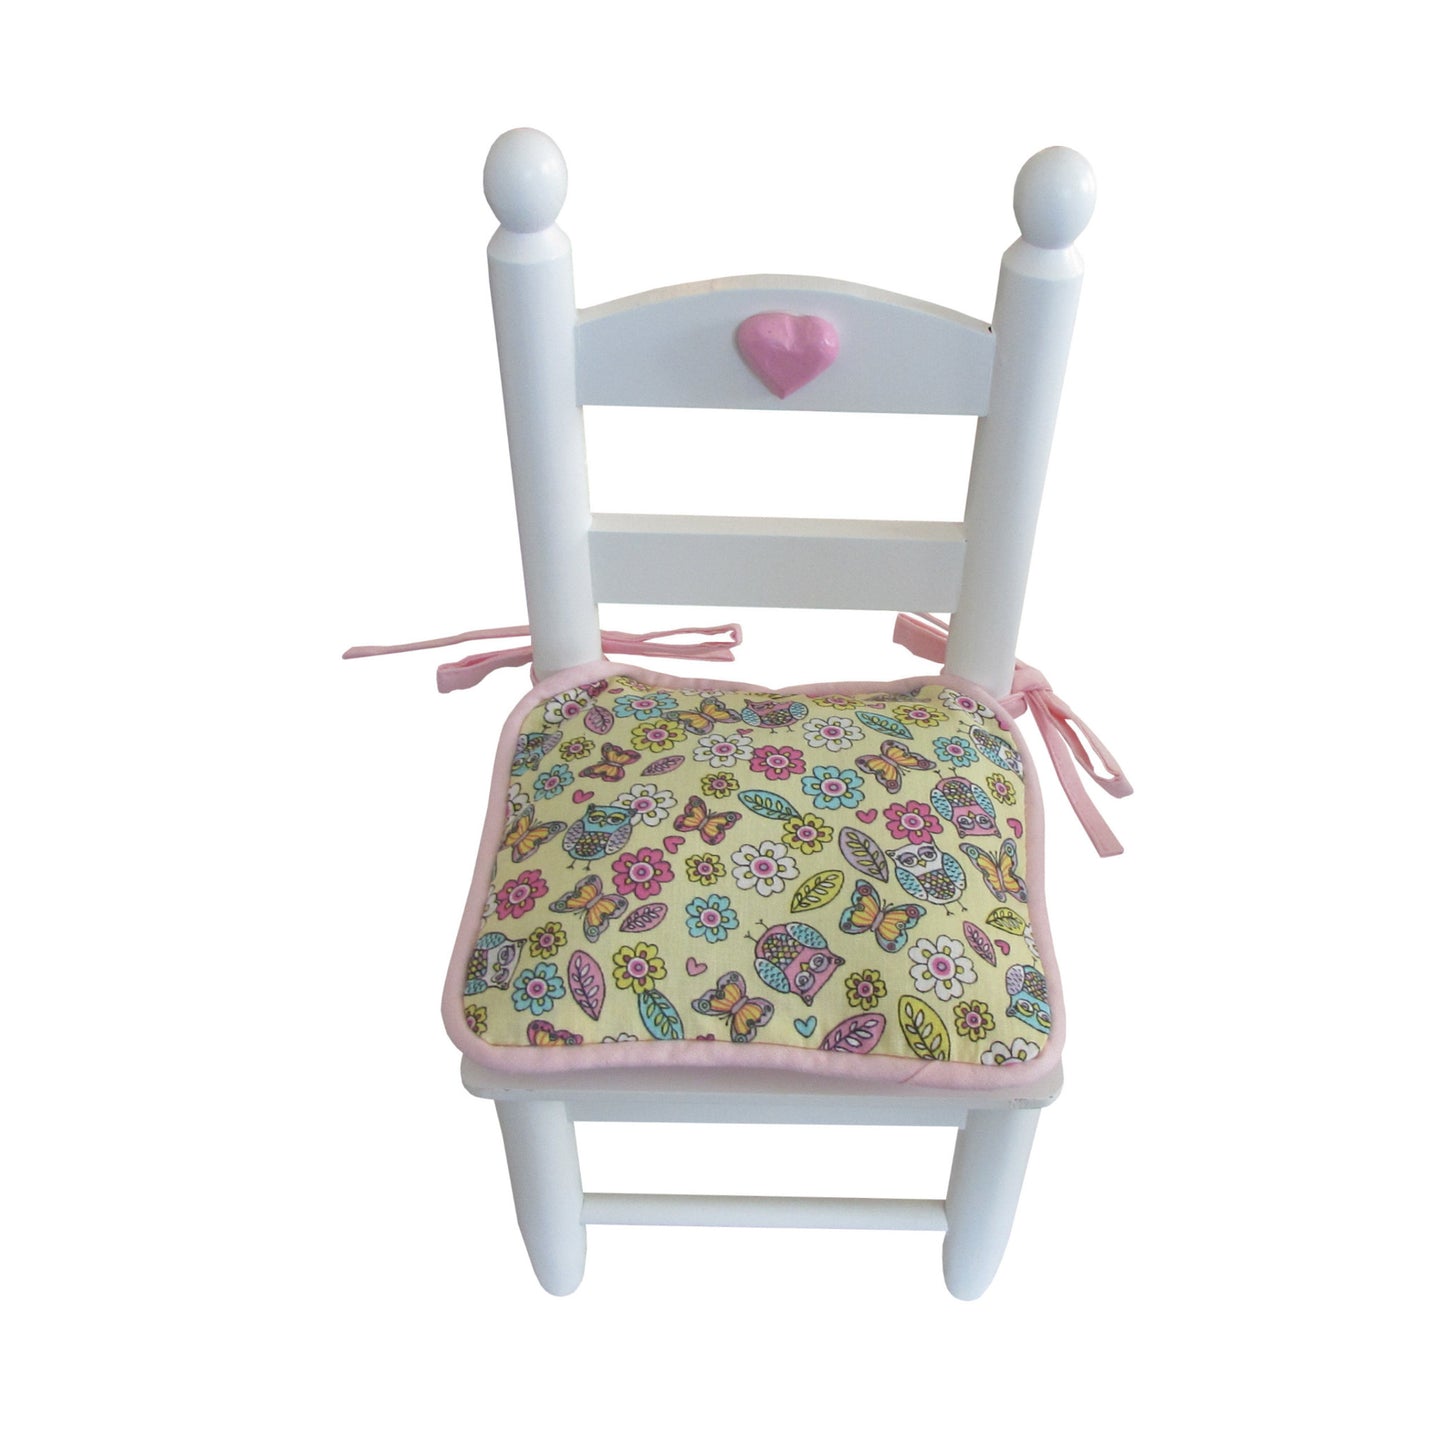 Owls and Flowers Print Doll Chair Cushion for 18-inch dolls Second view